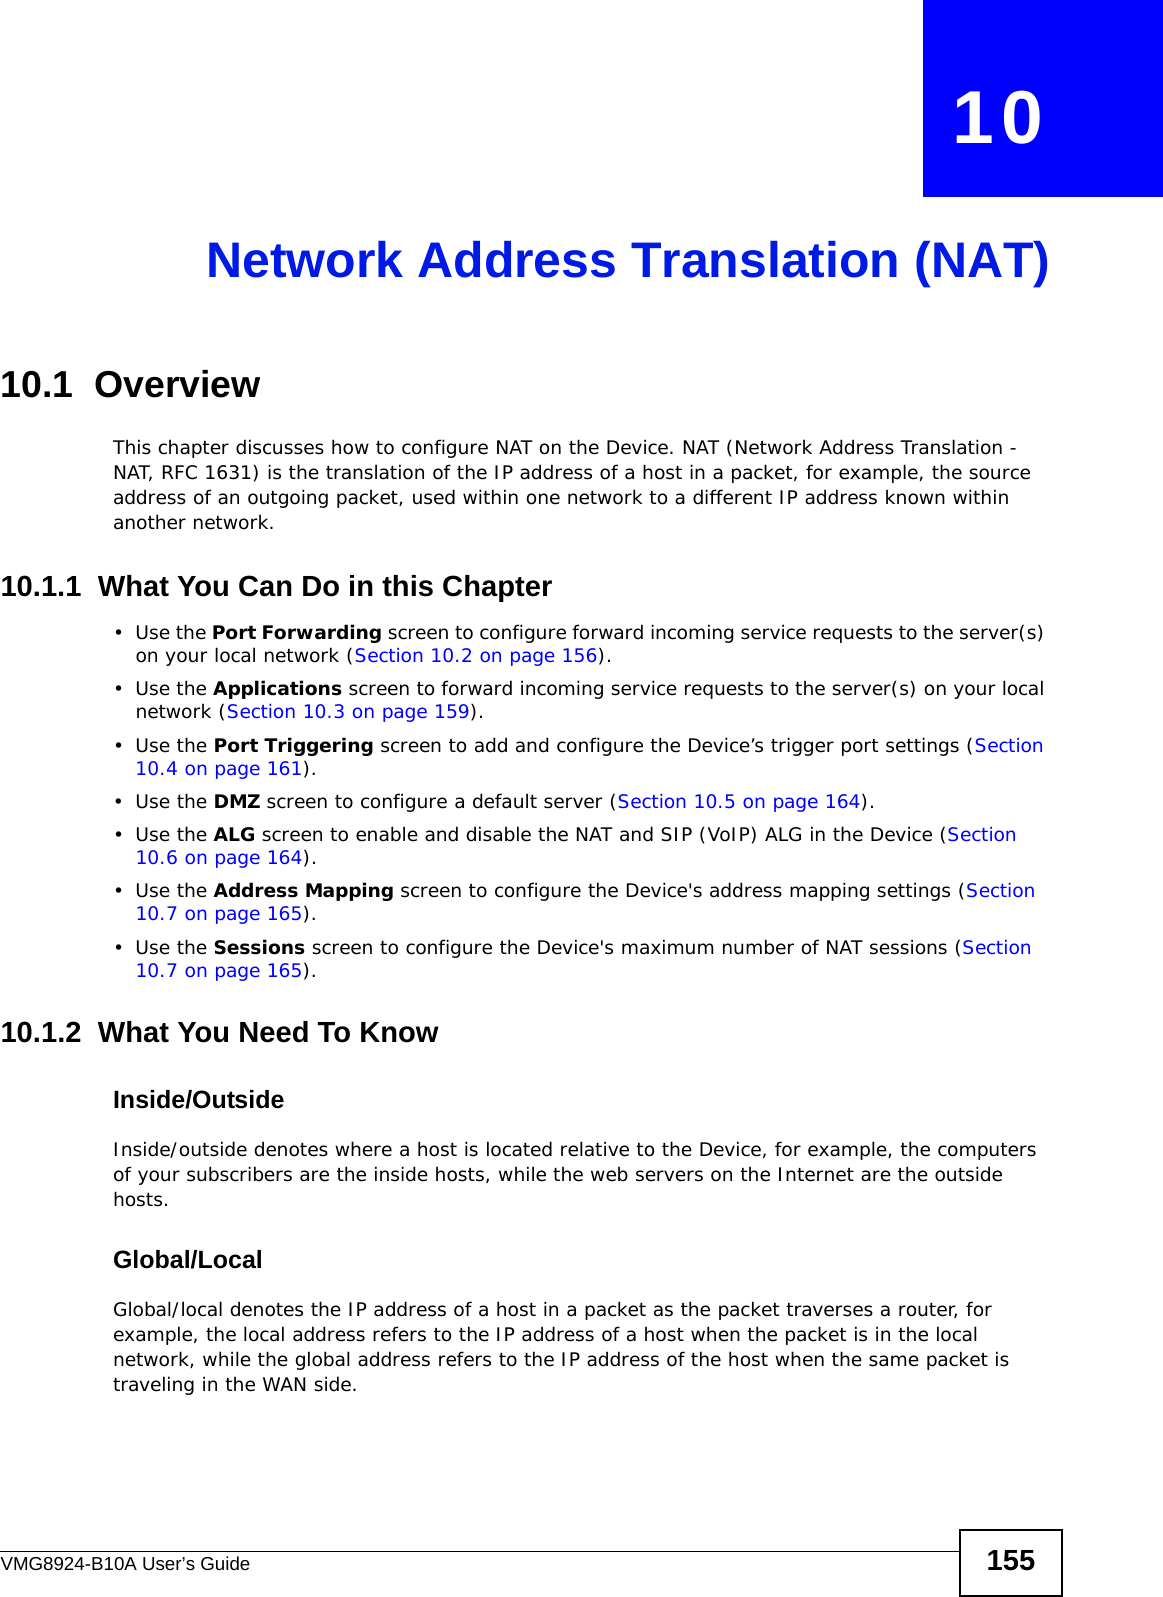 VMG8924-B10A User’s Guide 155CHAPTER   10Network Address Translation (NAT)10.1  OverviewThis chapter discusses how to configure NAT on the Device. NAT (Network Address Translation - NAT, RFC 1631) is the translation of the IP address of a host in a packet, for example, the source address of an outgoing packet, used within one network to a different IP address known within another network.10.1.1  What You Can Do in this Chapter•Use the Port Forwarding screen to configure forward incoming service requests to the server(s) on your local network (Section 10.2 on page 156). •Use the Applications screen to forward incoming service requests to the server(s) on your local network (Section 10.3 on page 159).•Use the Port Triggering screen to add and configure the Device’s trigger port settings (Section 10.4 on page 161).•Use the DMZ screen to configure a default server (Section 10.5 on page 164).•Use the ALG screen to enable and disable the NAT and SIP (VoIP) ALG in the Device (Section 10.6 on page 164).•Use the Address Mapping screen to configure the Device&apos;s address mapping settings (Section 10.7 on page 165). •Use the Sessions screen to configure the Device&apos;s maximum number of NAT sessions (Section 10.7 on page 165). 10.1.2  What You Need To KnowInside/OutsideInside/outside denotes where a host is located relative to the Device, for example, the computers of your subscribers are the inside hosts, while the web servers on the Internet are the outside hosts. Global/LocalGlobal/local denotes the IP address of a host in a packet as the packet traverses a router, for example, the local address refers to the IP address of a host when the packet is in the local network, while the global address refers to the IP address of the host when the same packet is traveling in the WAN side. 